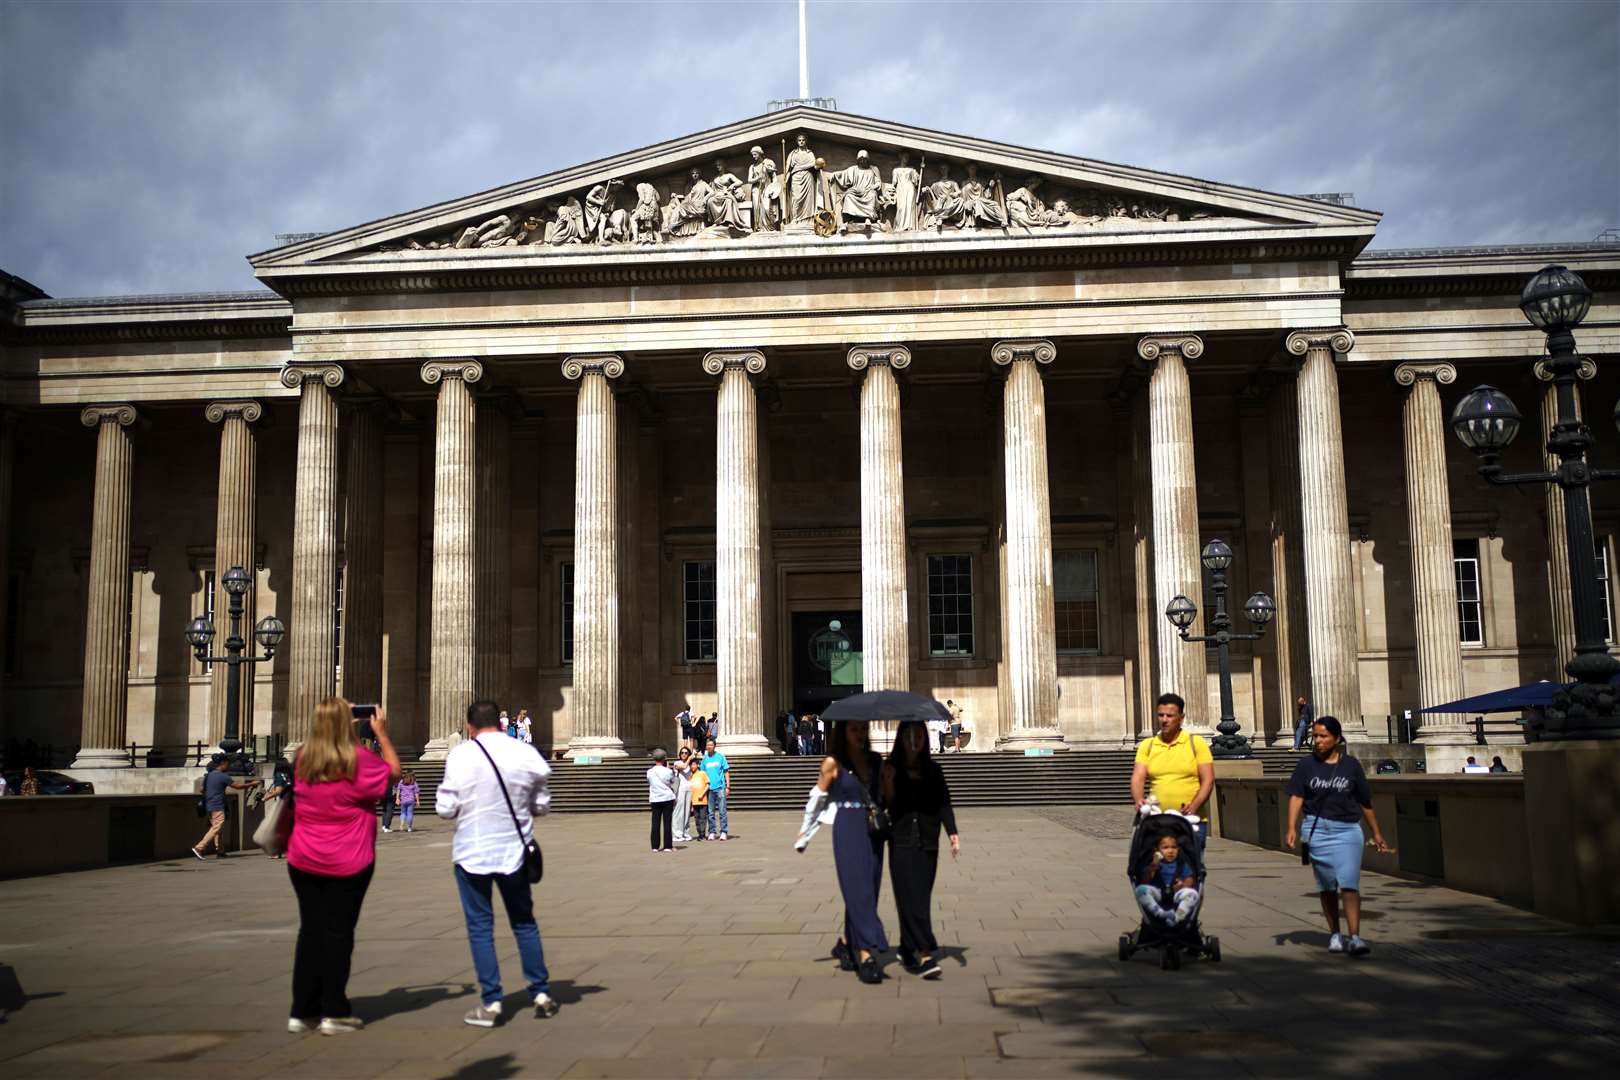 A man has been interviewed by the Metropolitan Police following alleged thefts at the museum, as the force confirmed no arrests have been made (Yui Mok/PA)